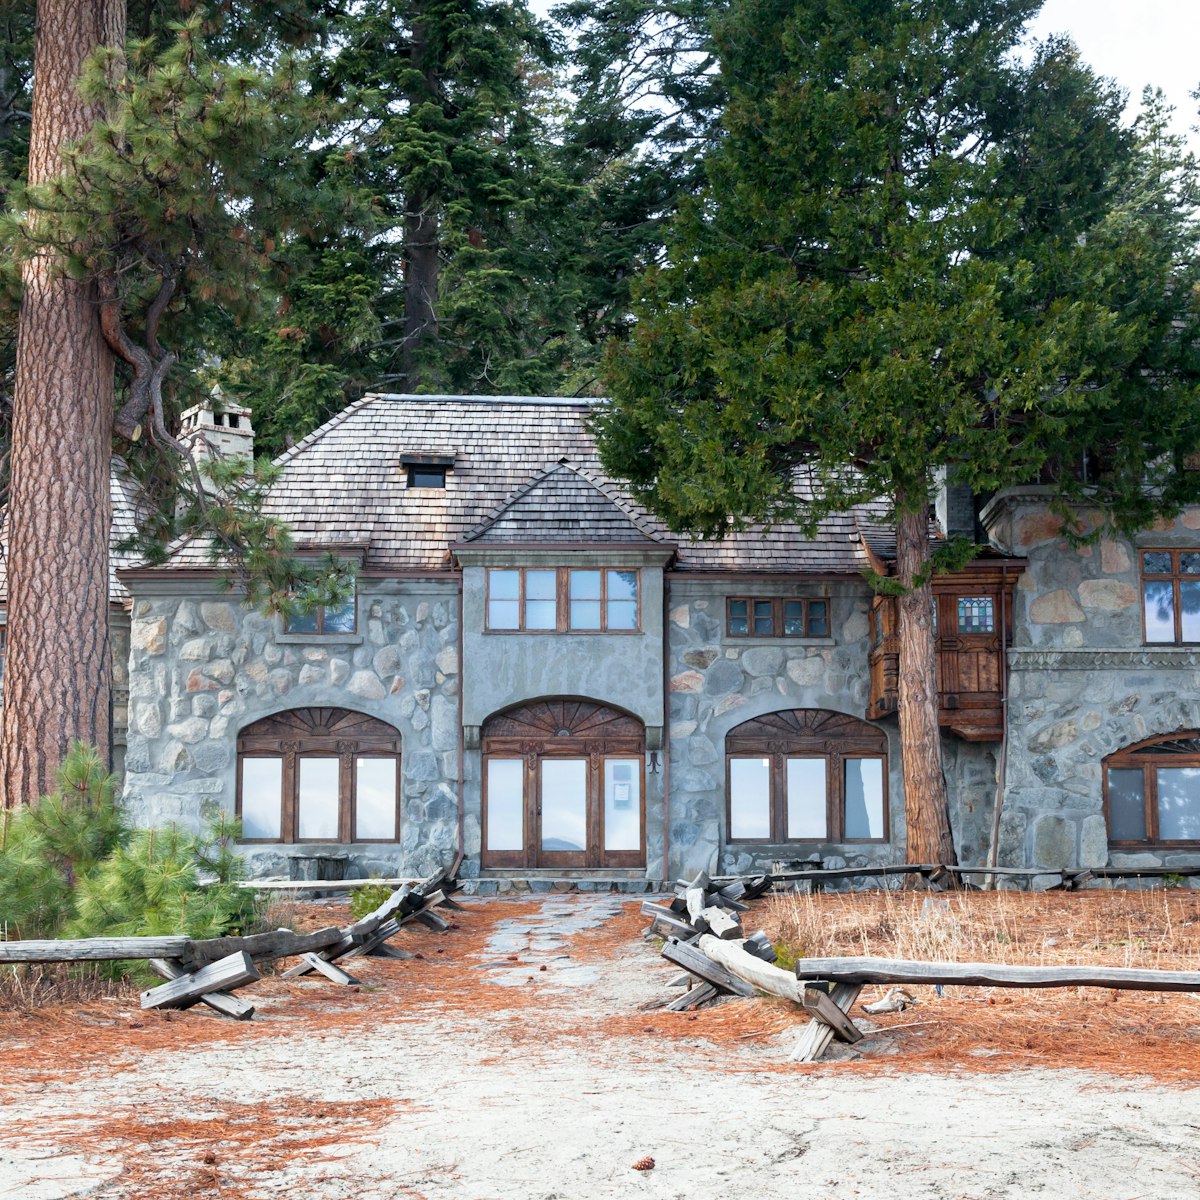 Tahoma, CA, USA - March 4, 2014: Vikingsholm is a preserved historic building at Emerald Bay, Lake Tahoe. It is an excellent example of Scandinavian architecture in the western hemisphere.
492819437
Travel, Tourism, Scandinavian Culture, Building Exterior, Stone Material, Emerald Bay, Lake Tahoe, Protection, History, Local Landmark, Famous Place, Architecture, Bay Of Water, Castle, Built Structure, VikingsHolm